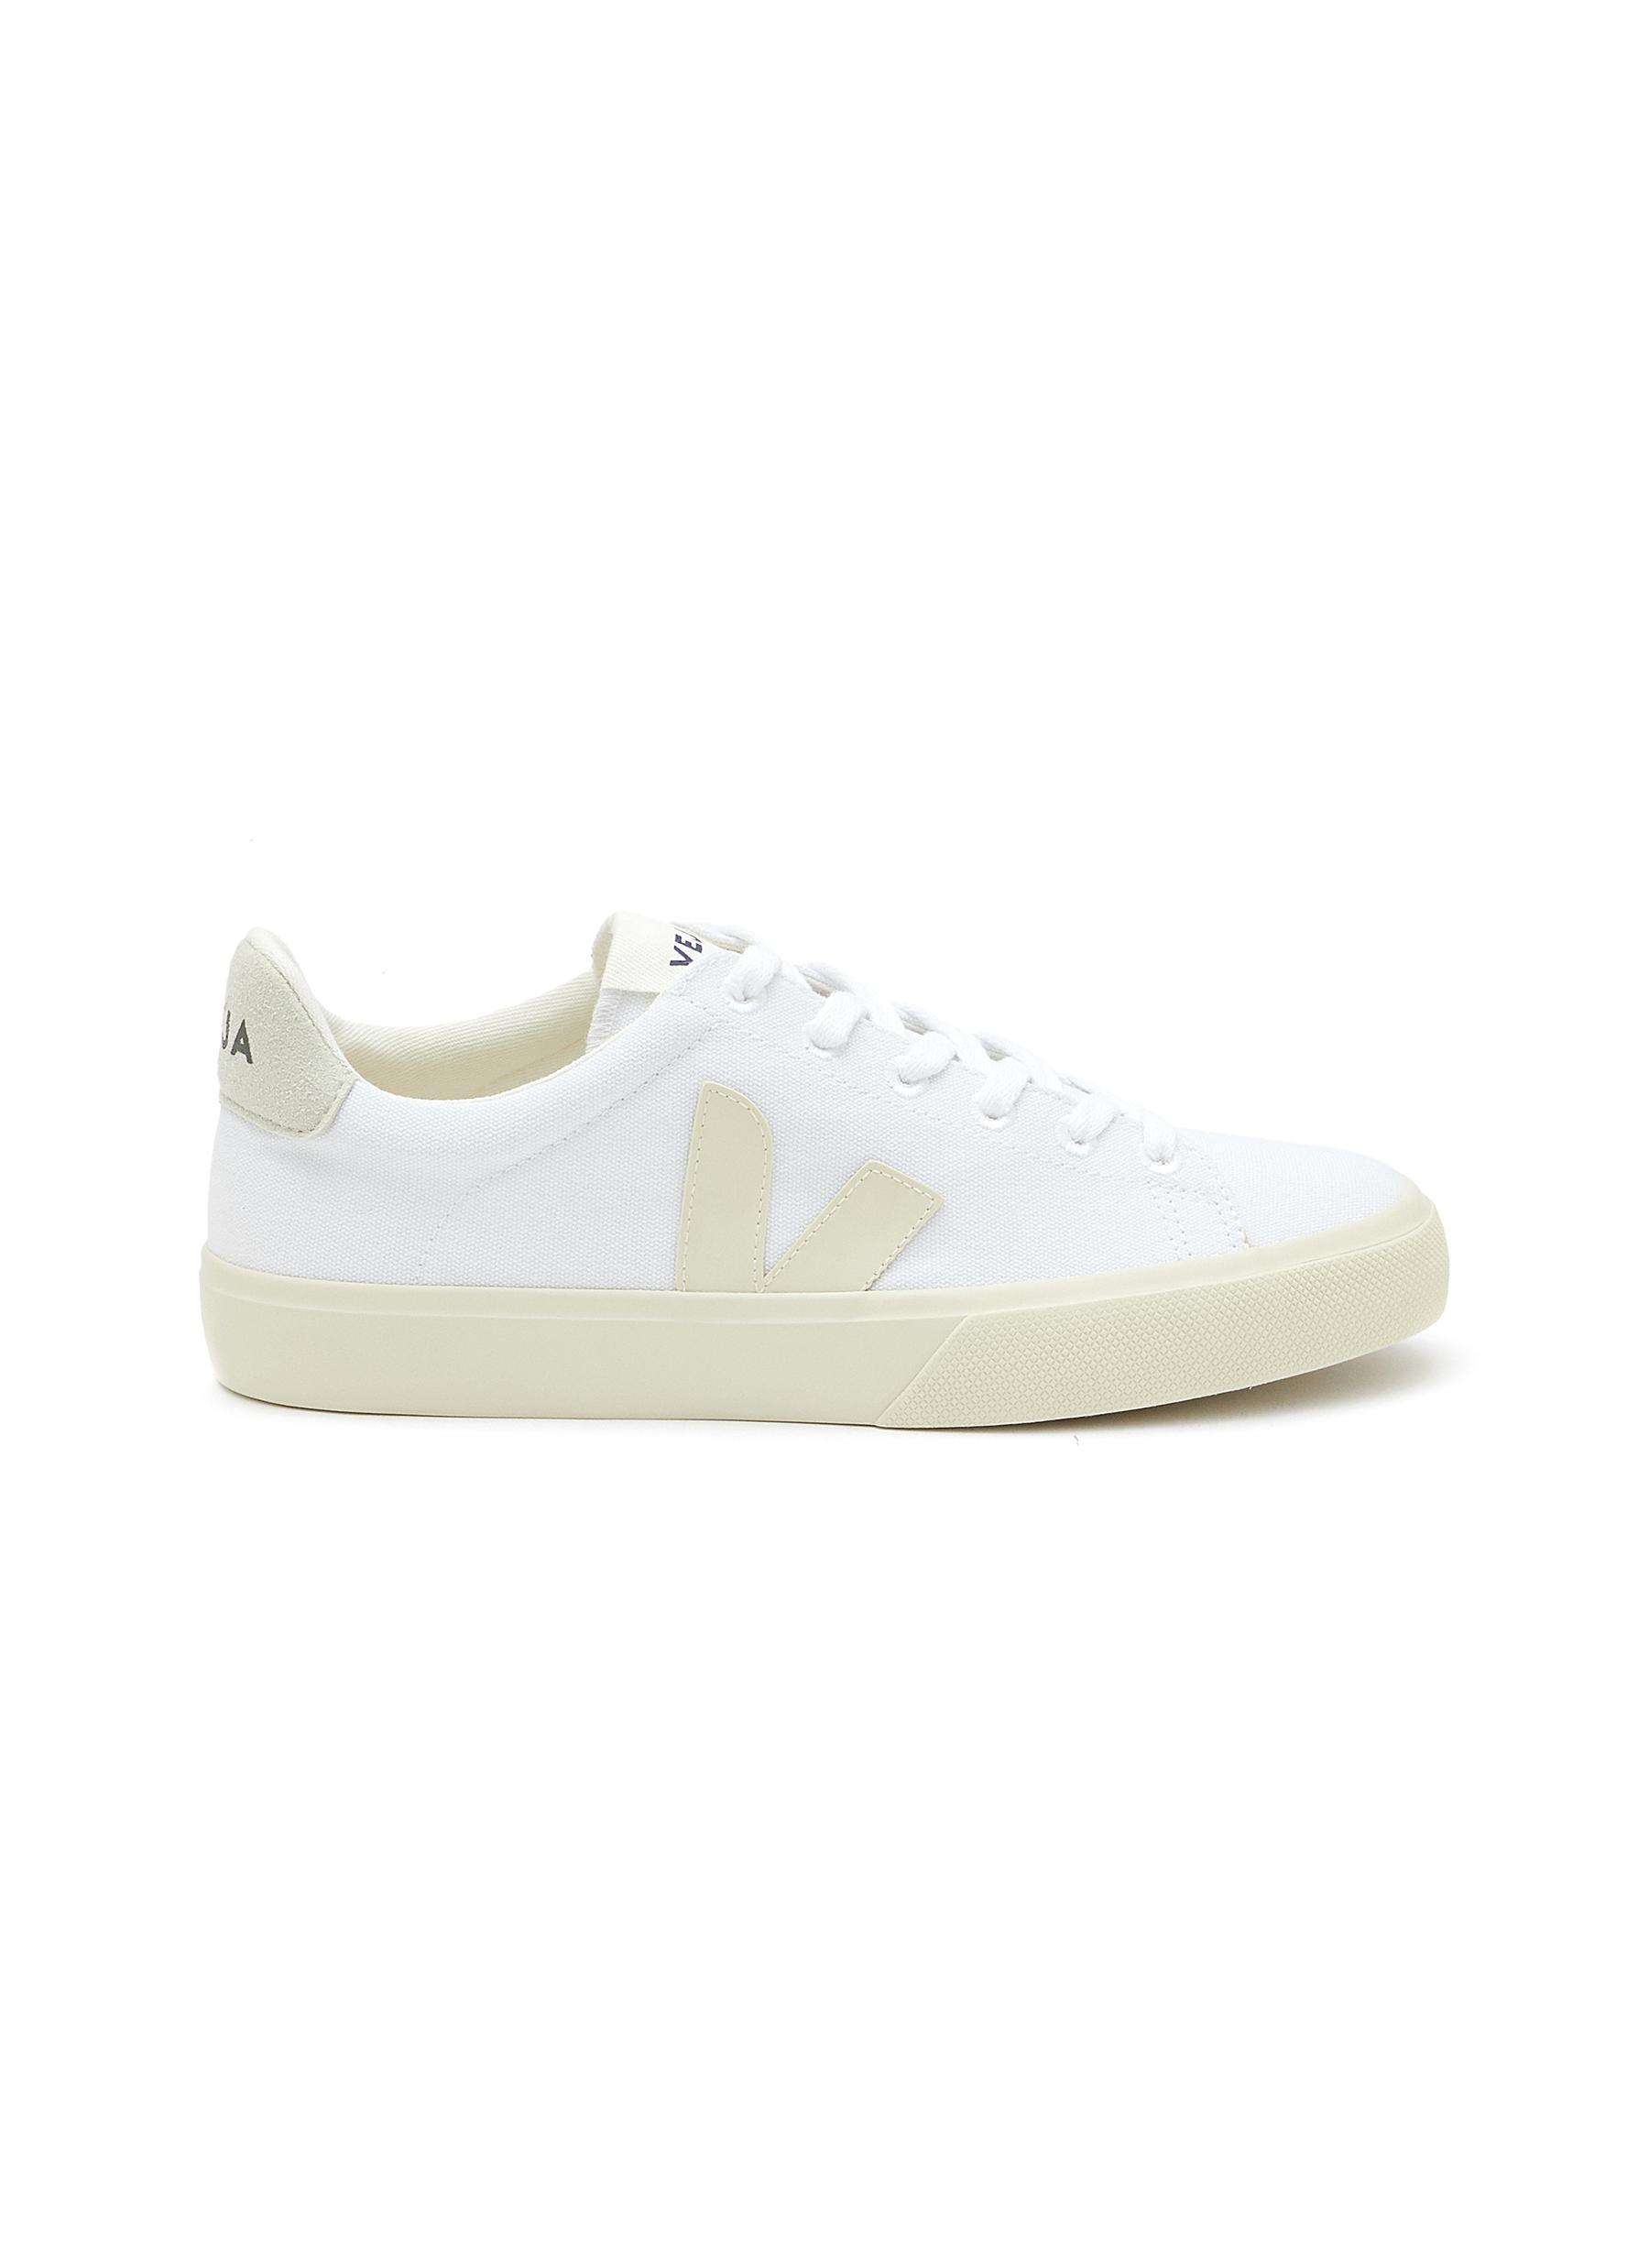 Veja 'campo' Canvas Low Top Lace Up Sneakers in White | Lyst